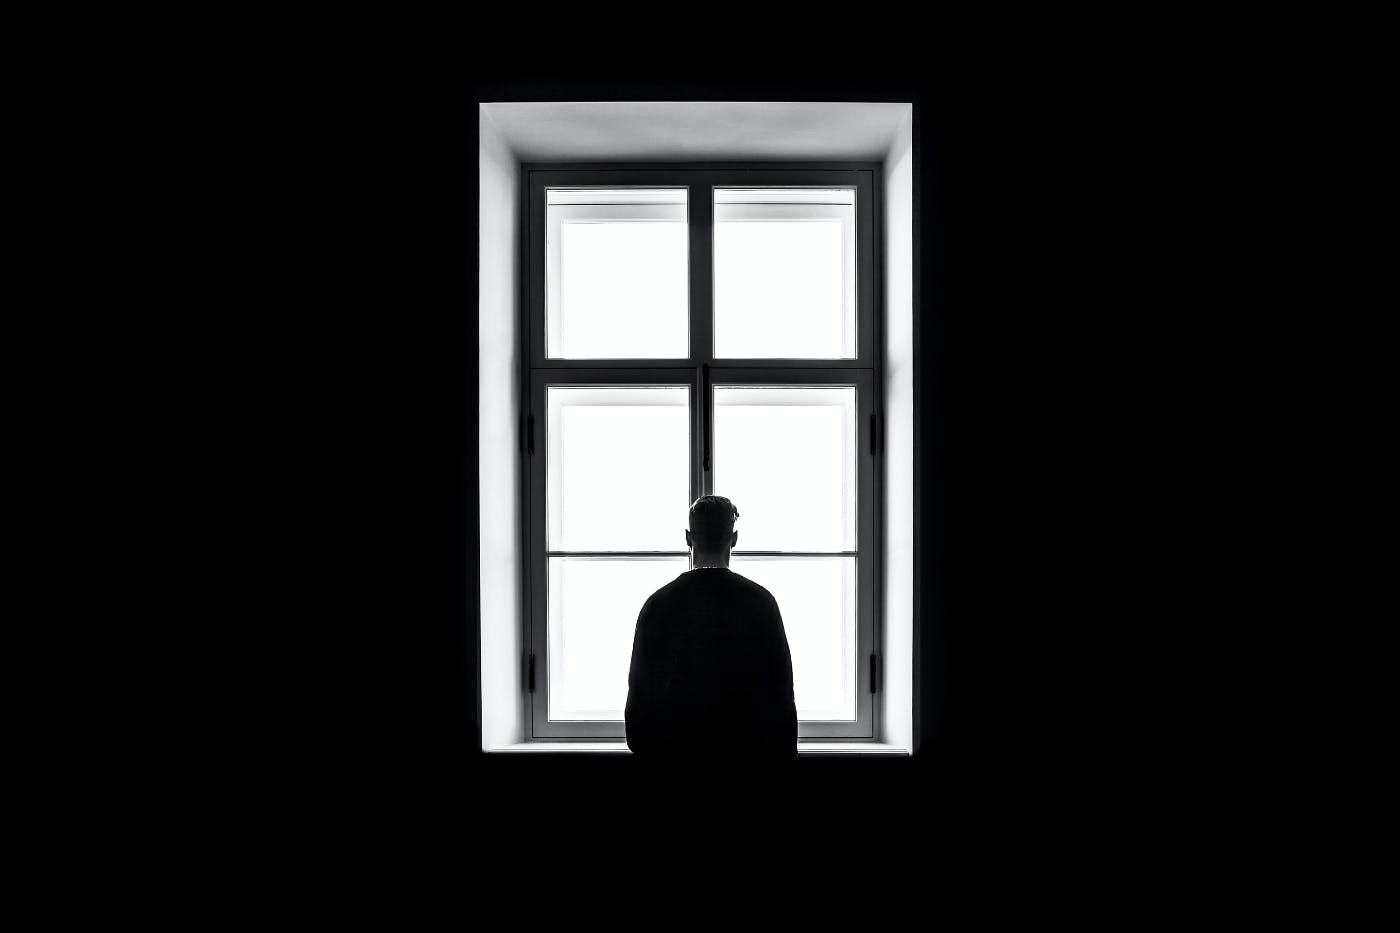 A man standing in a window